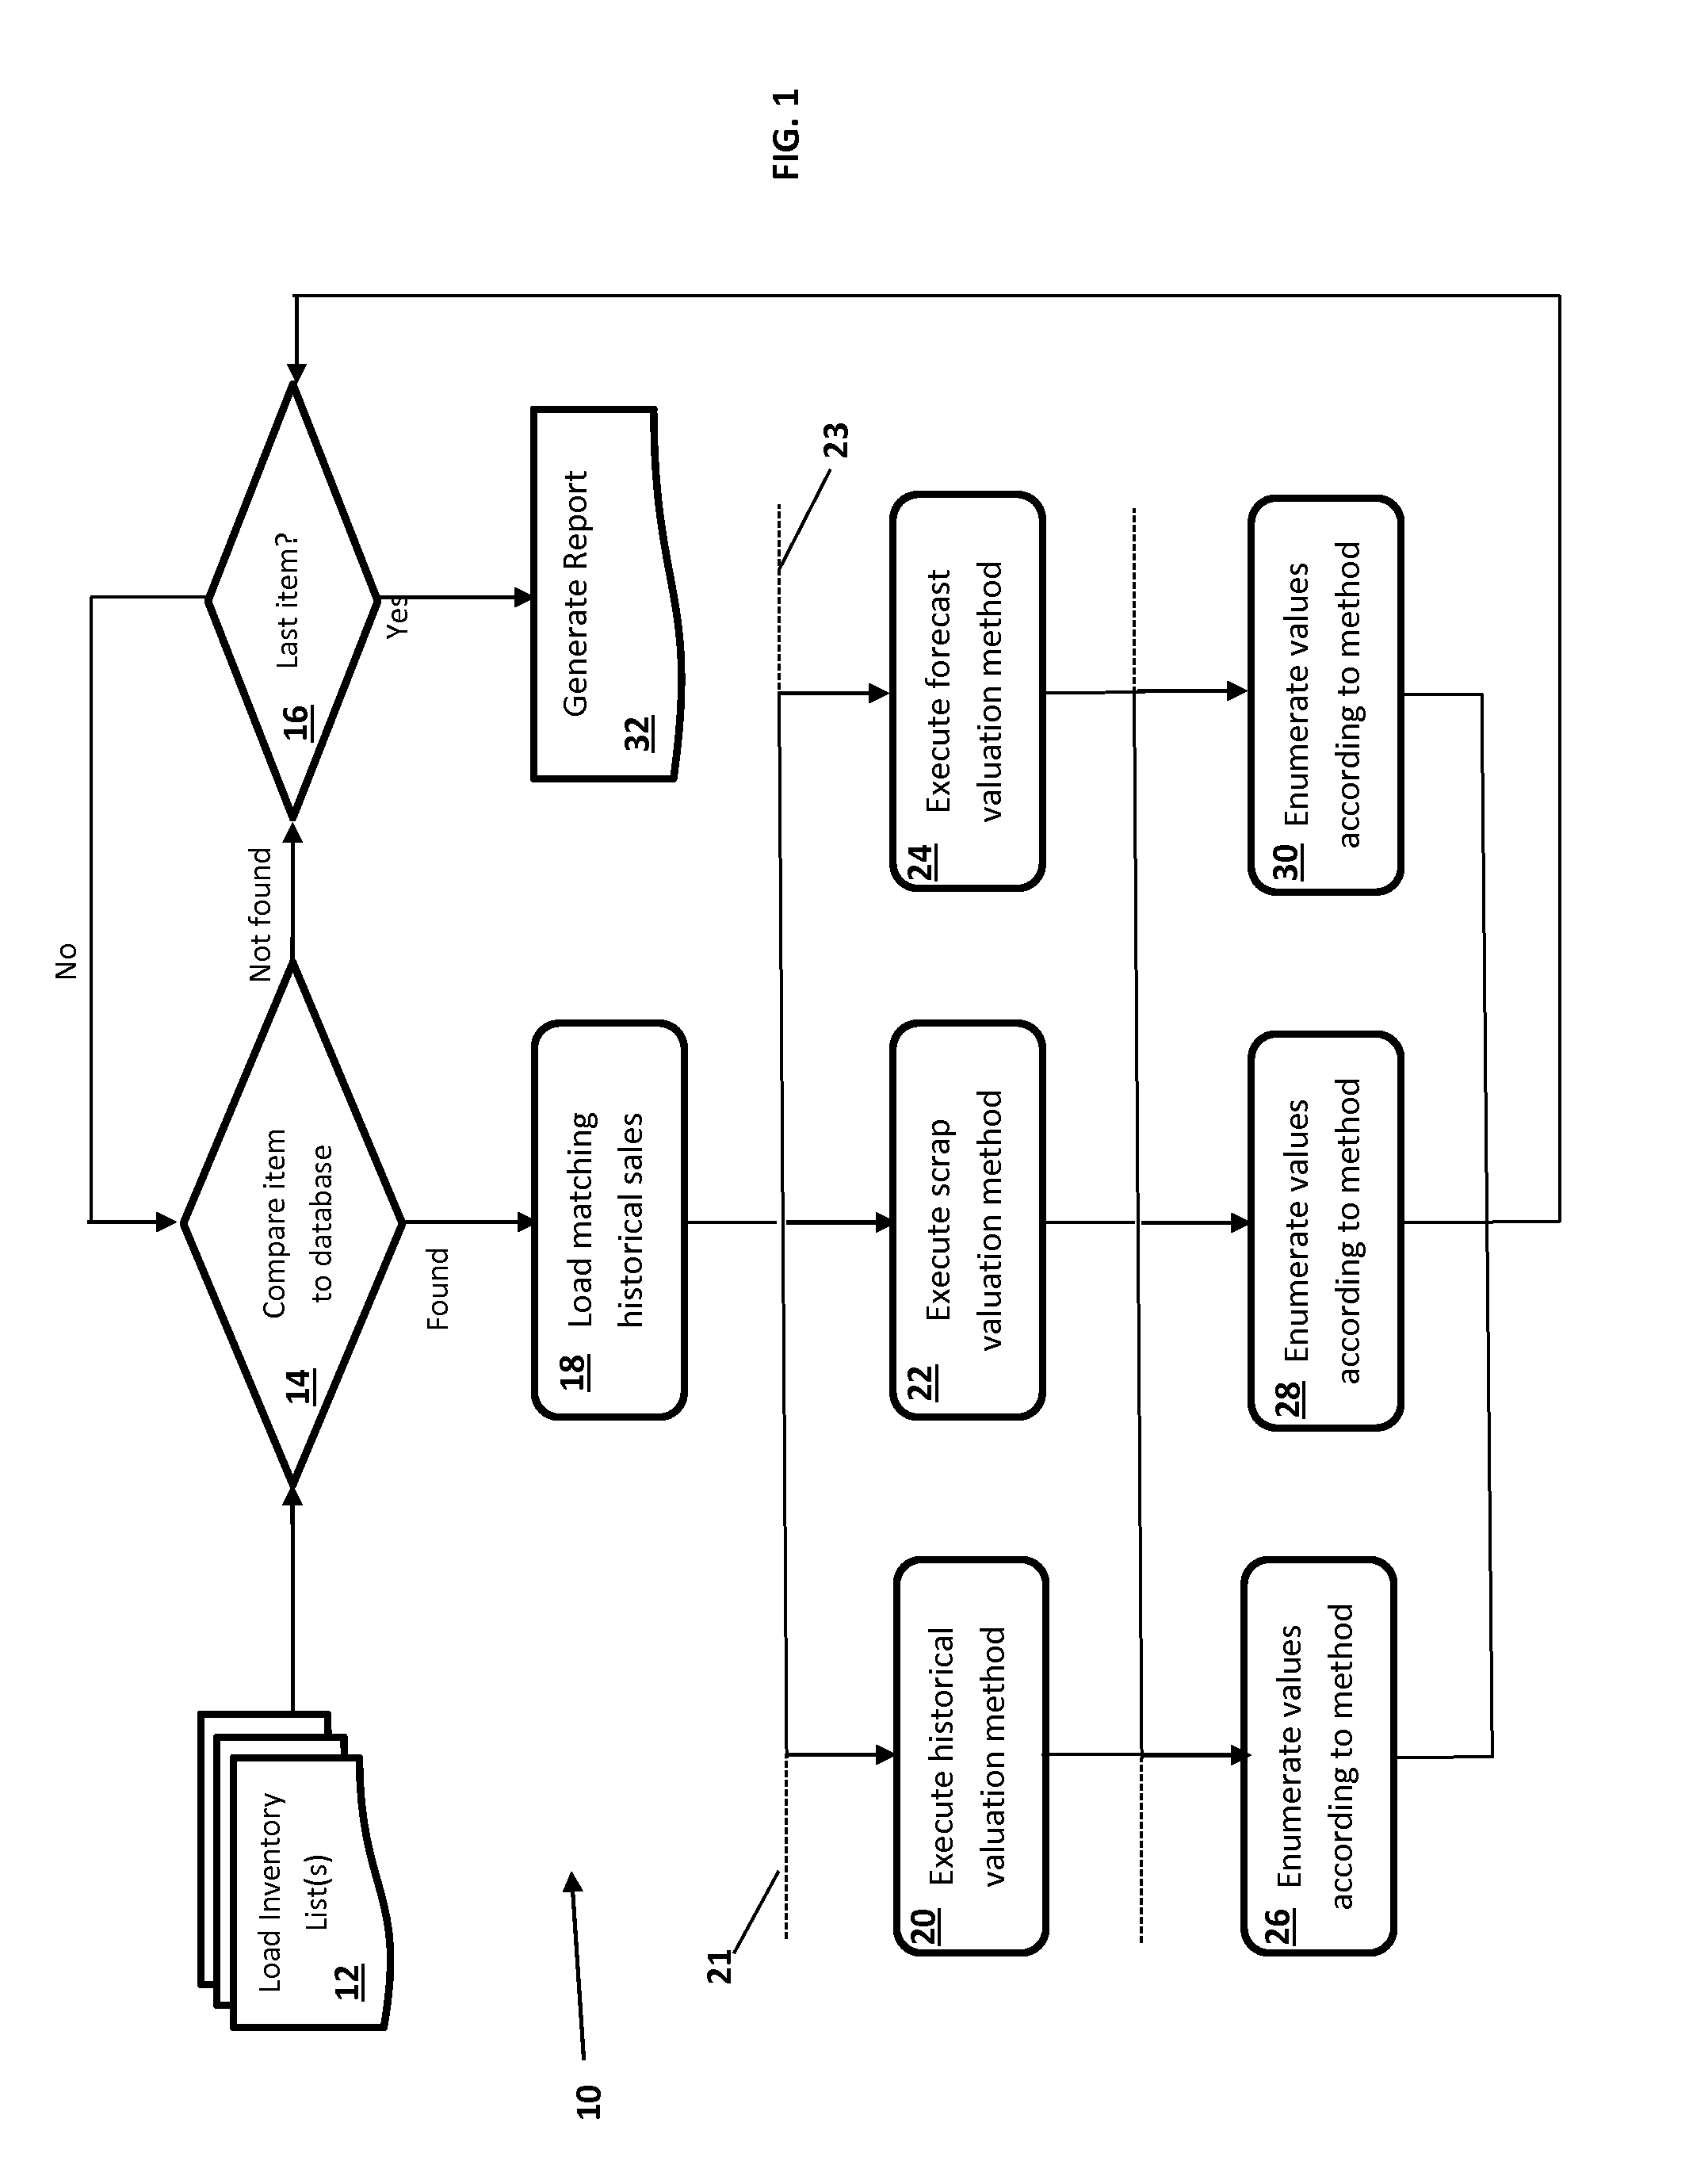 Product valuation system and method